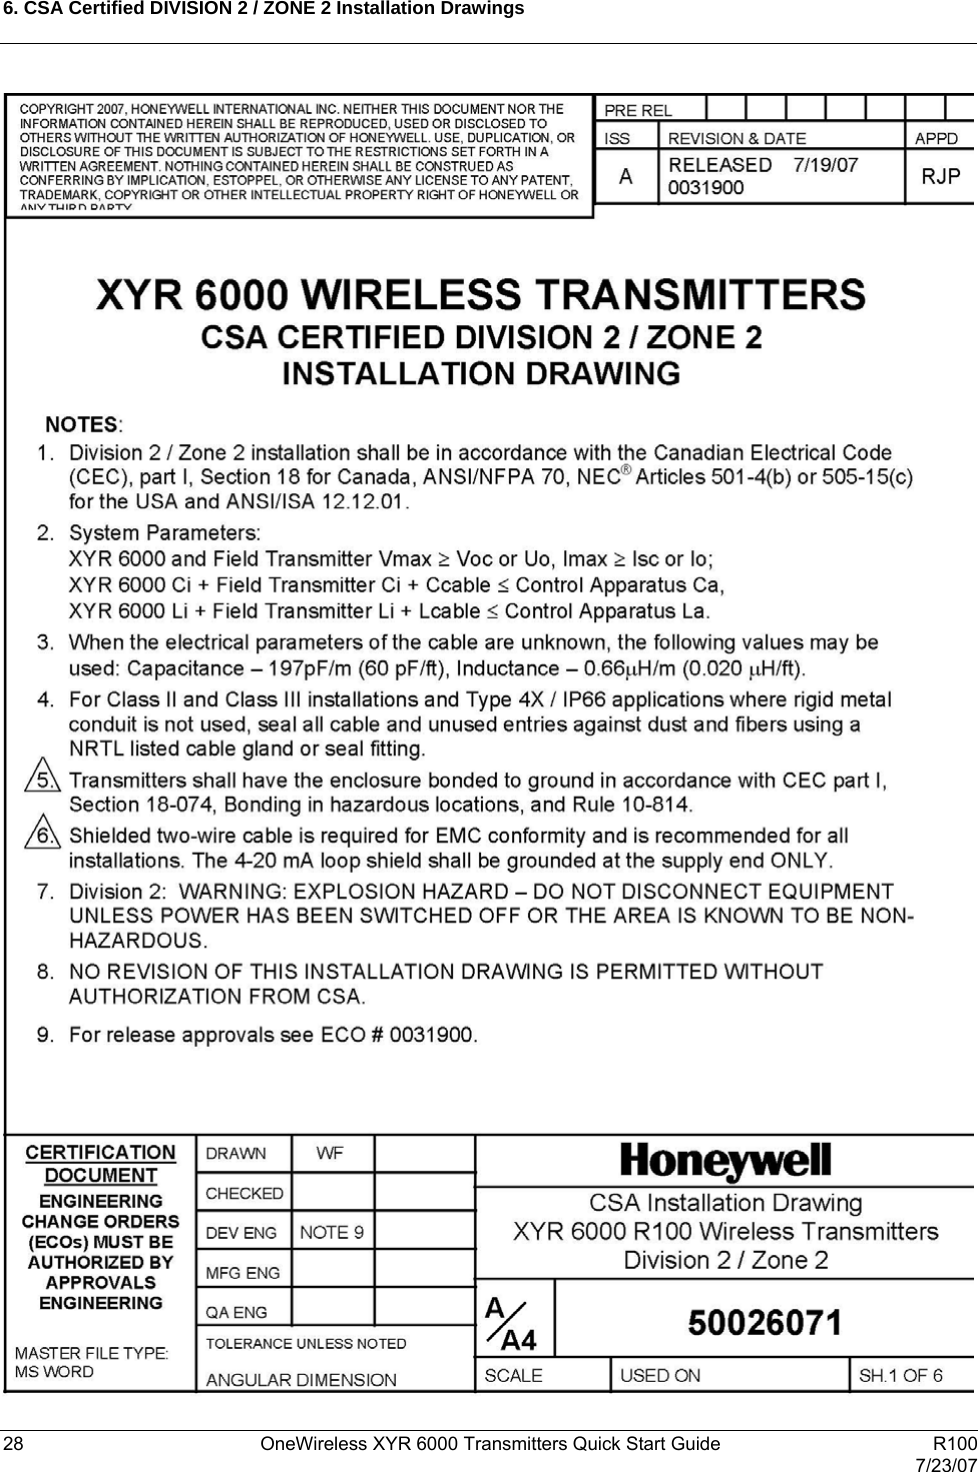 6. CSA Certified DIVISION 2 / ZONE 2 Installation Drawings  28  OneWireless XYR 6000 Transmitters Quick Start Guide   R100   7/23/07   